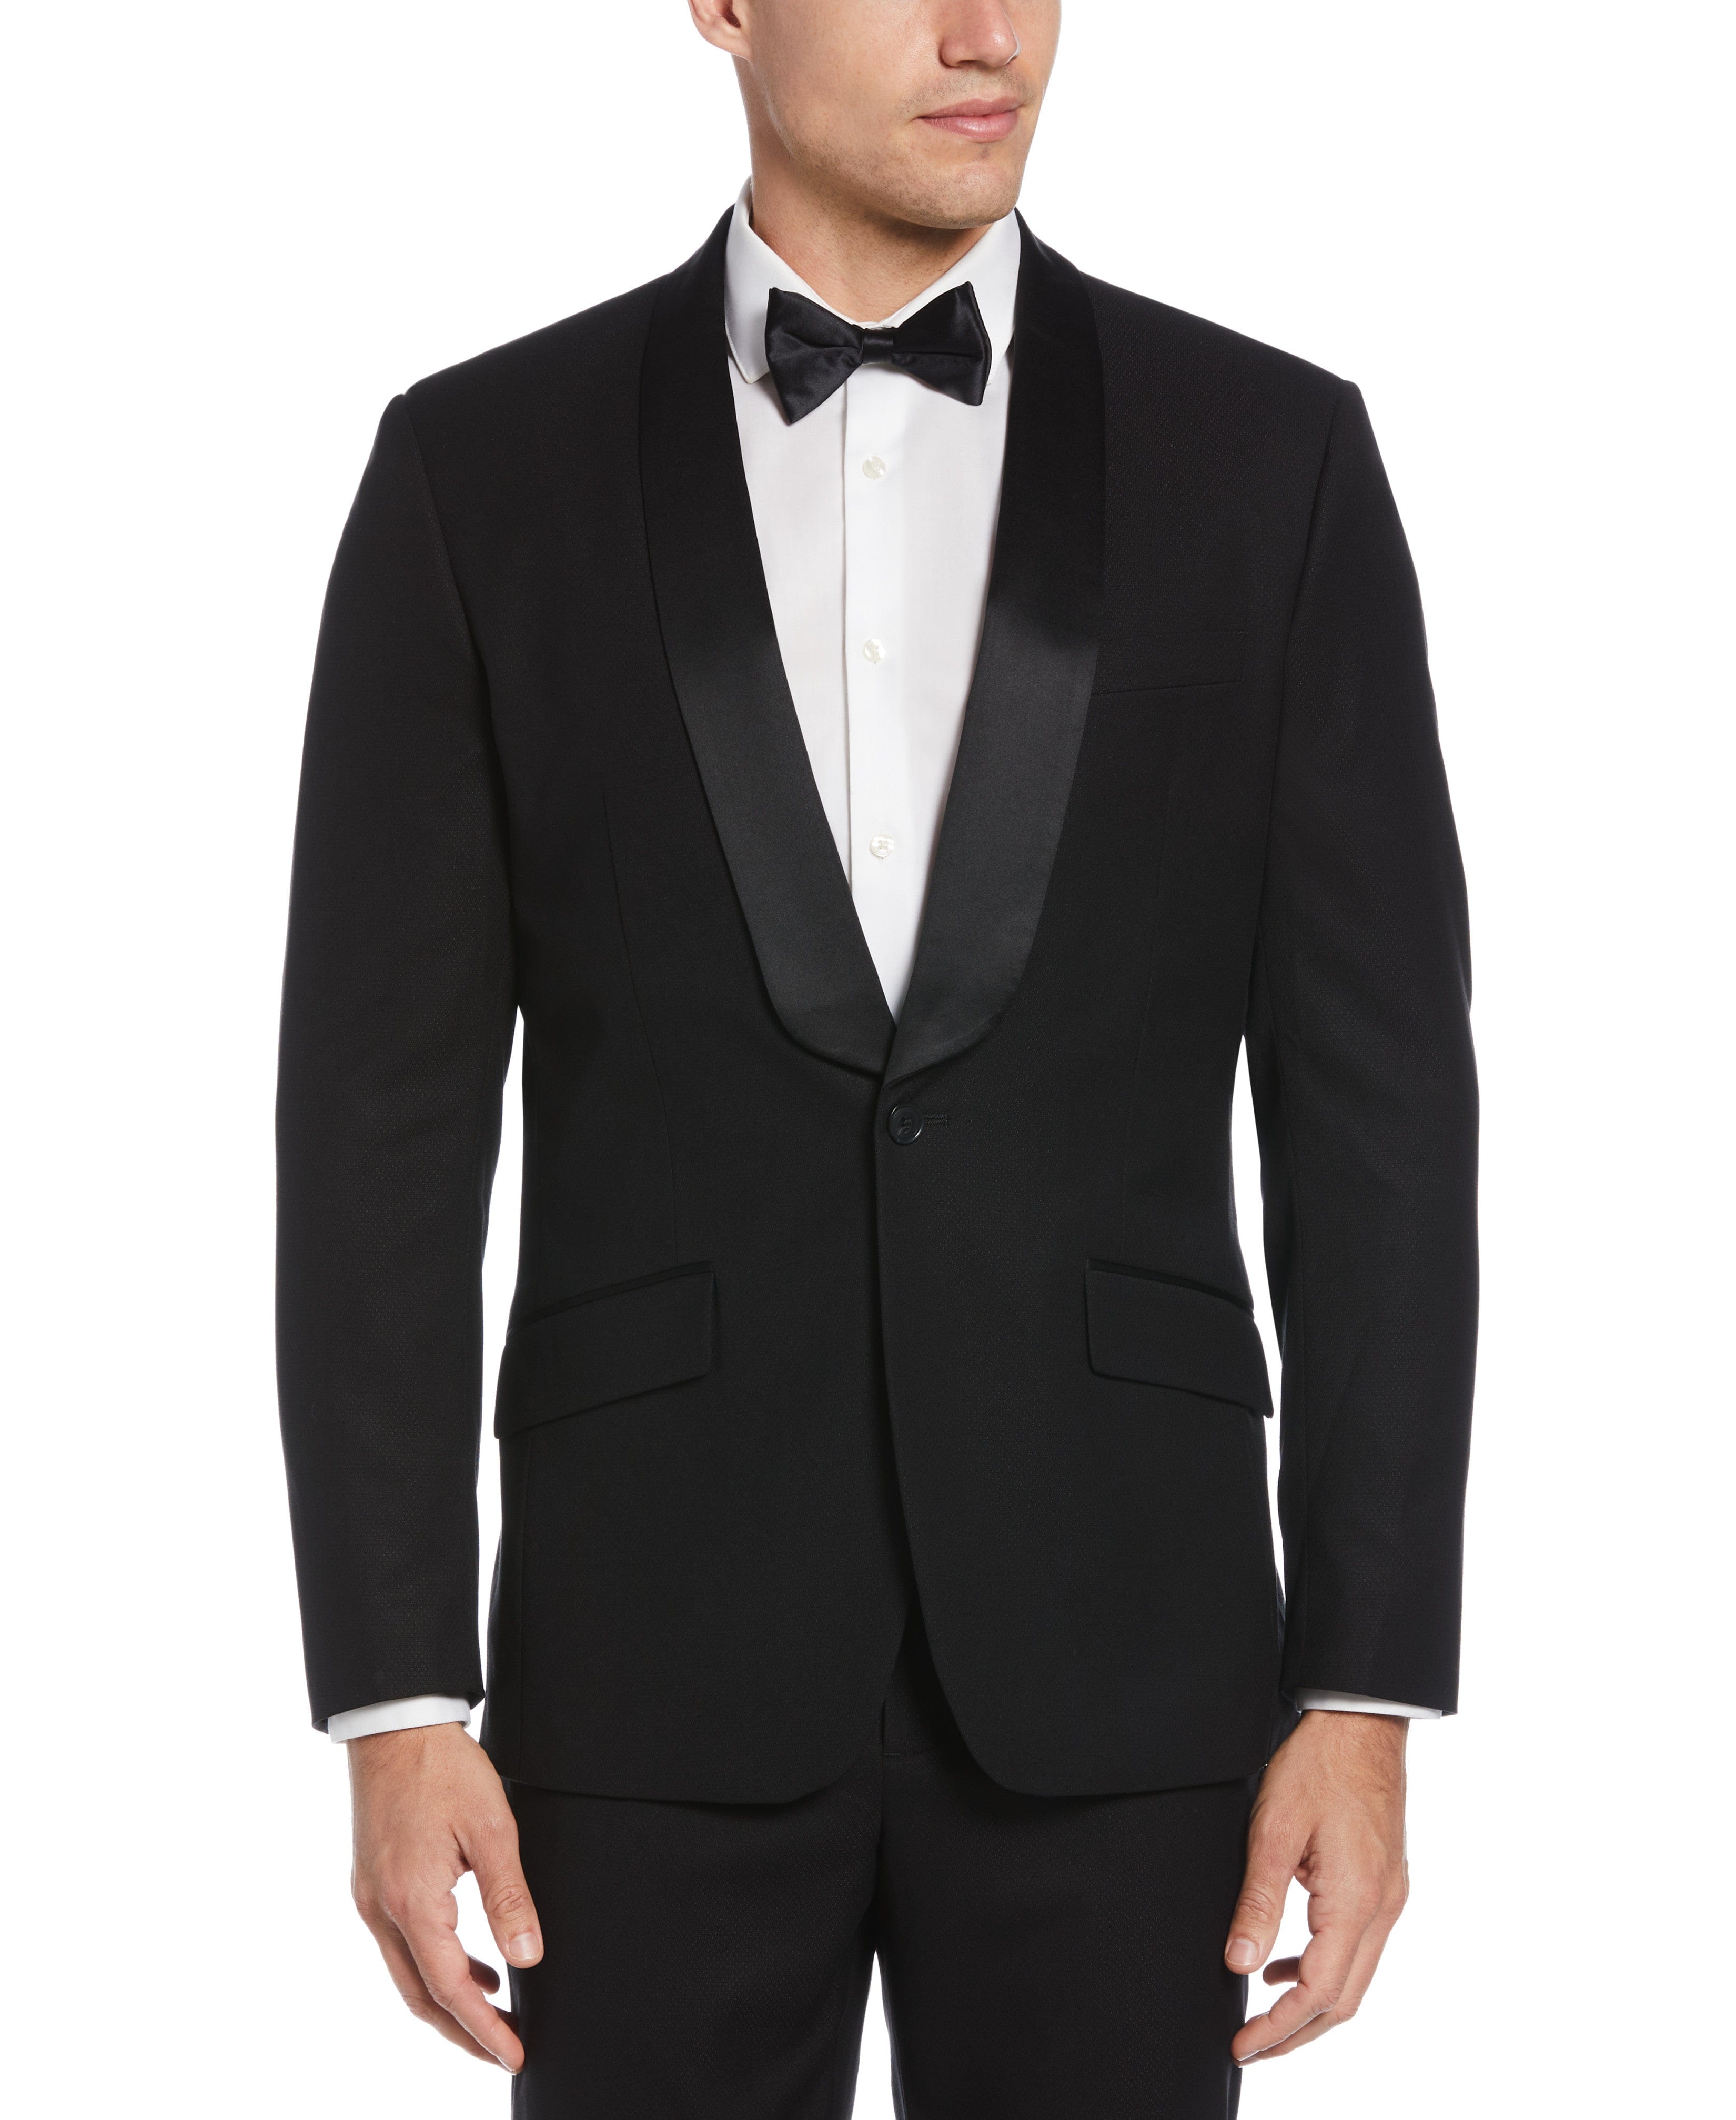 New Vintage Tuxedos, Tailcoats, Morning Suits, Dinner Jackets